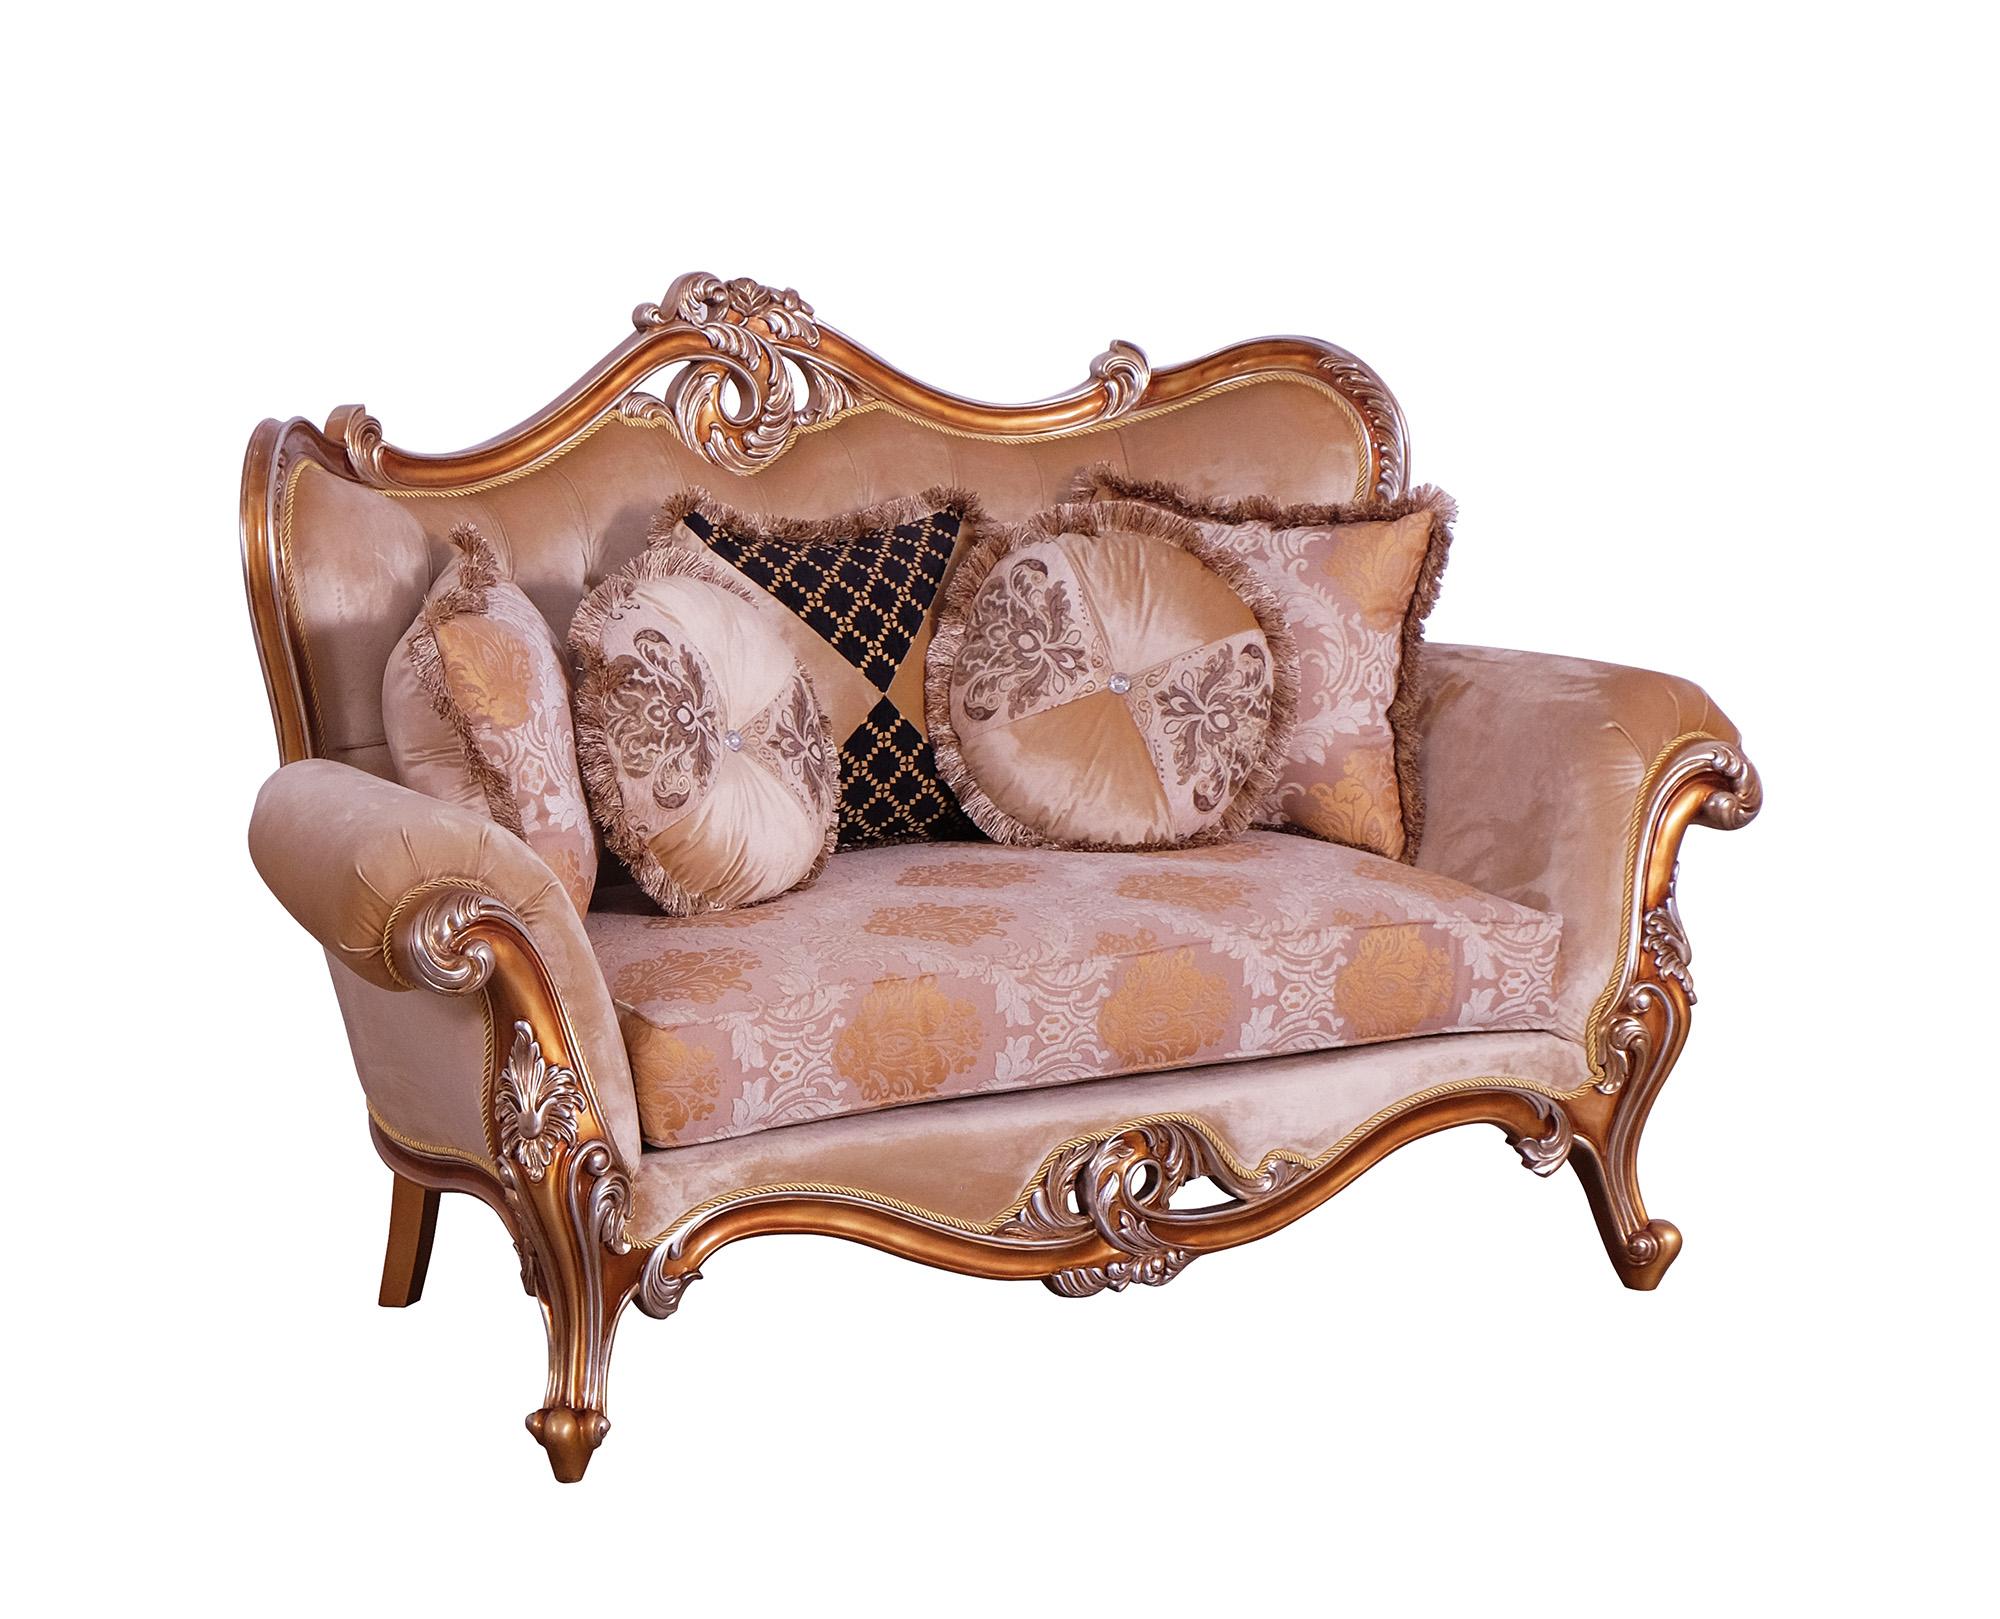 Classic, Traditional Loveseat AUGUSTUS 37057-L in Sand, Gold Fabric